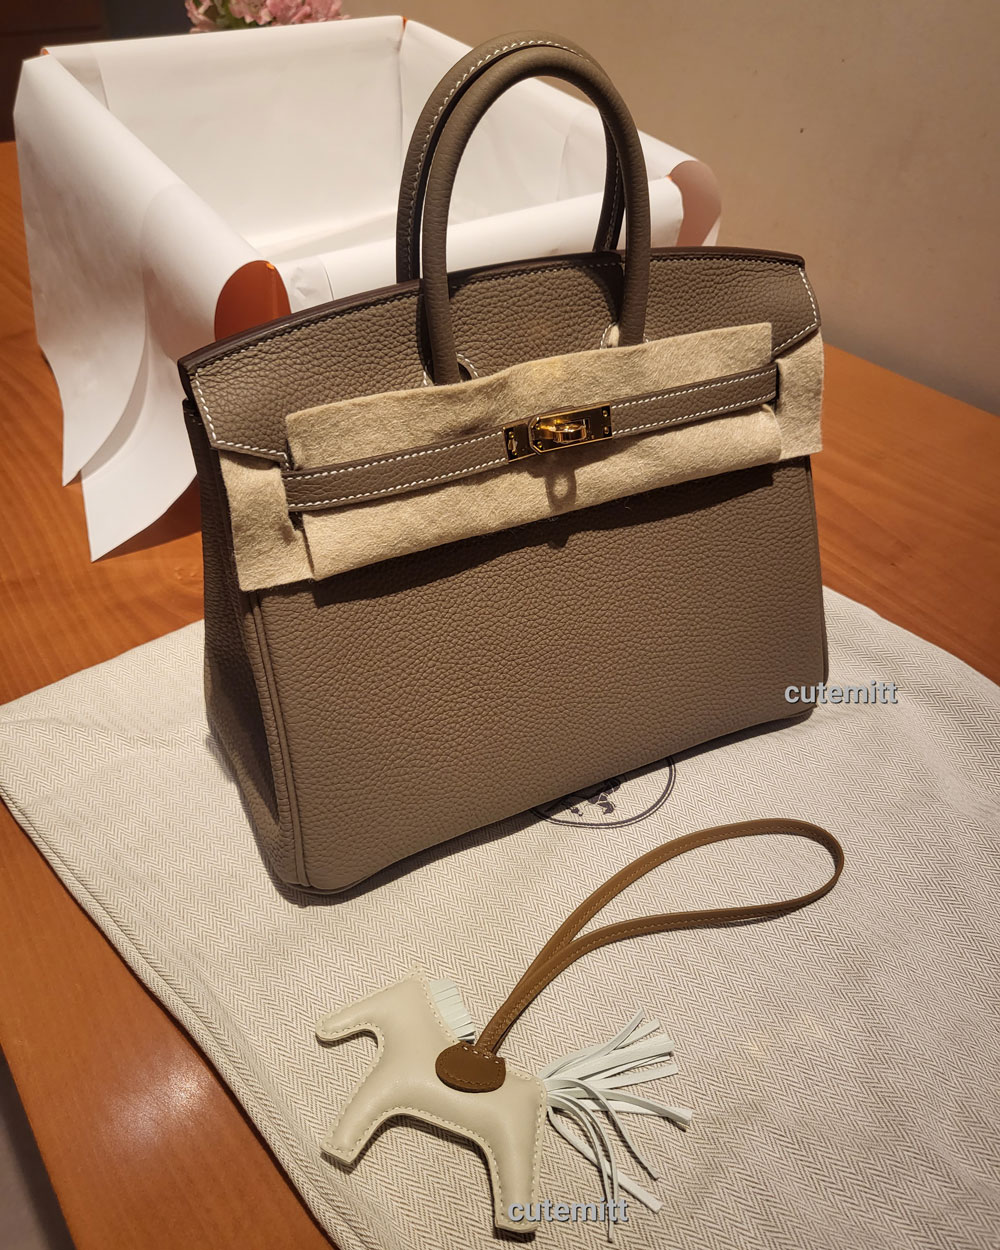 The 2021 Guide to Hermès Special Orders - PurseBlog